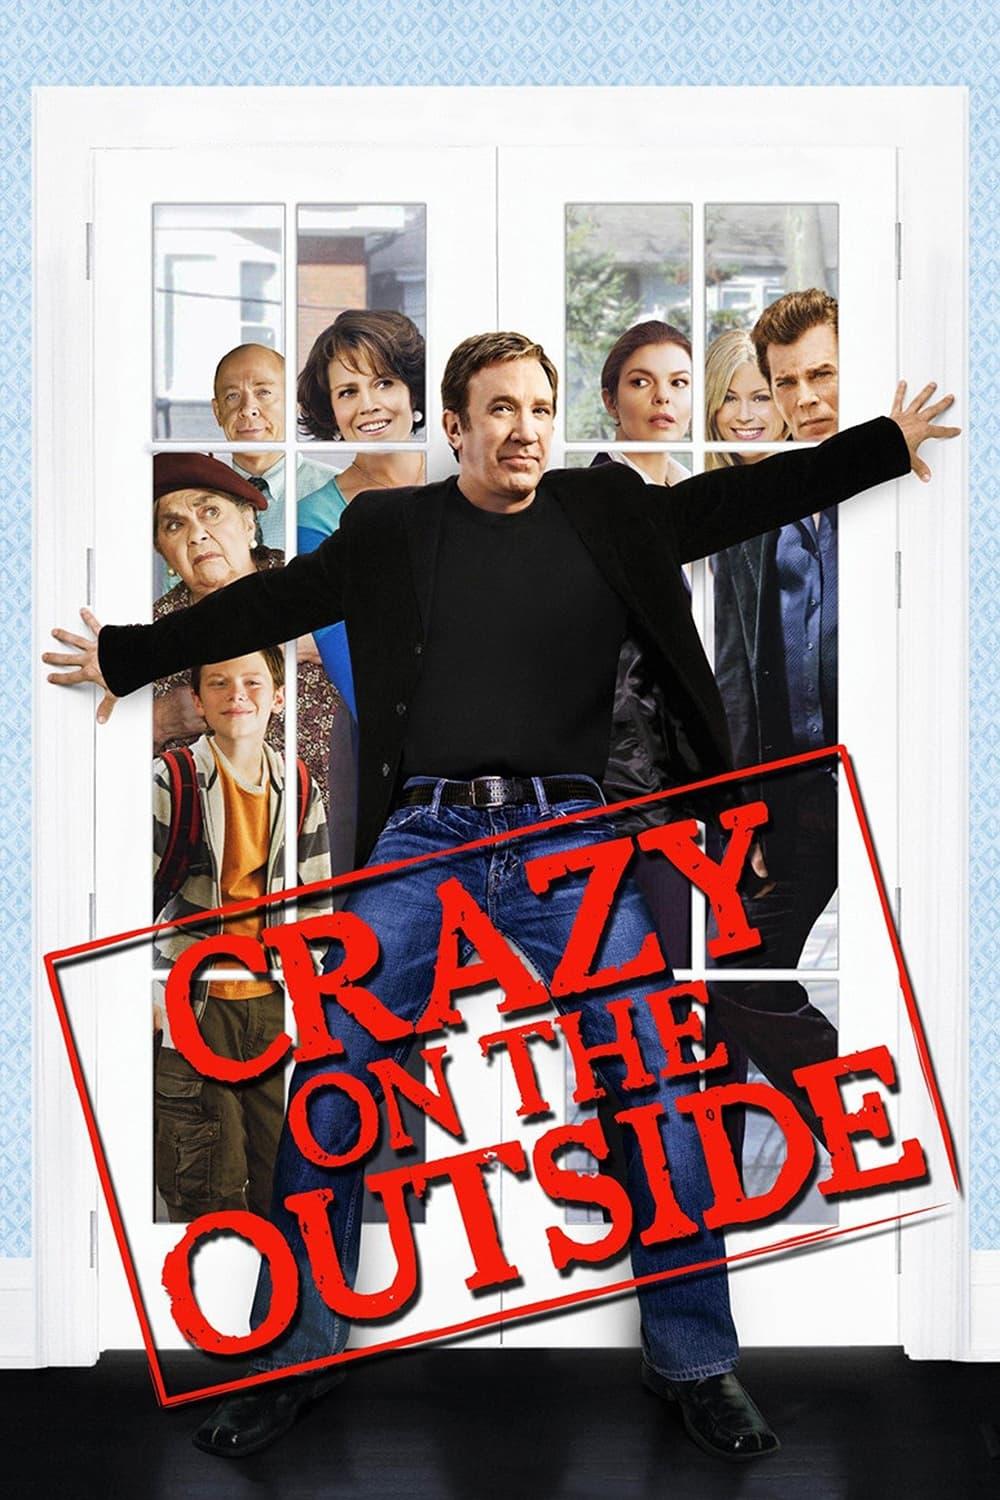 Crazy on the Outside poster